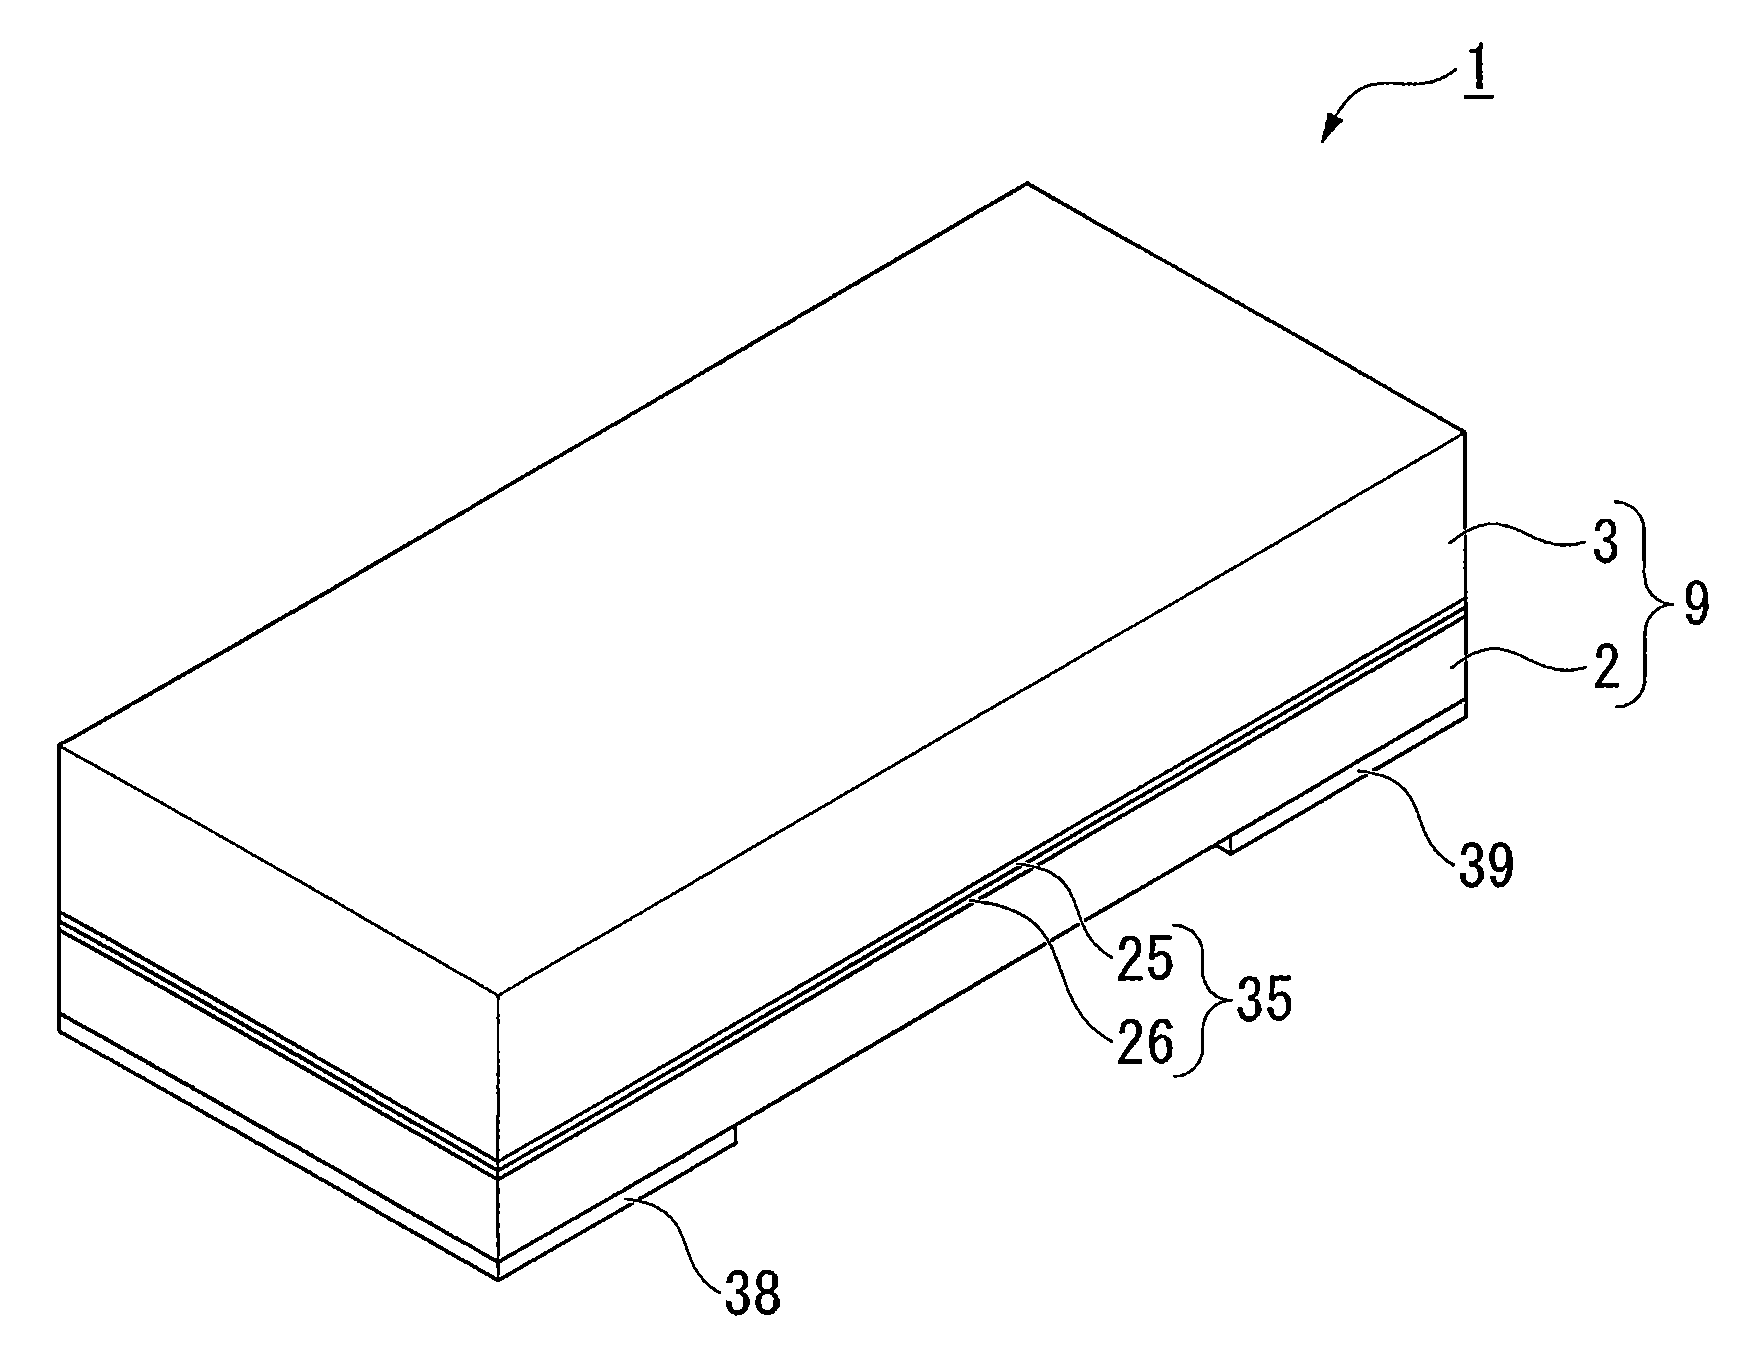 Glass substrate bonding method, glass assembly, package manufacturing method, package, piezoelectric vibrator, oscillator, electronic device, and radio-controlled timepiece